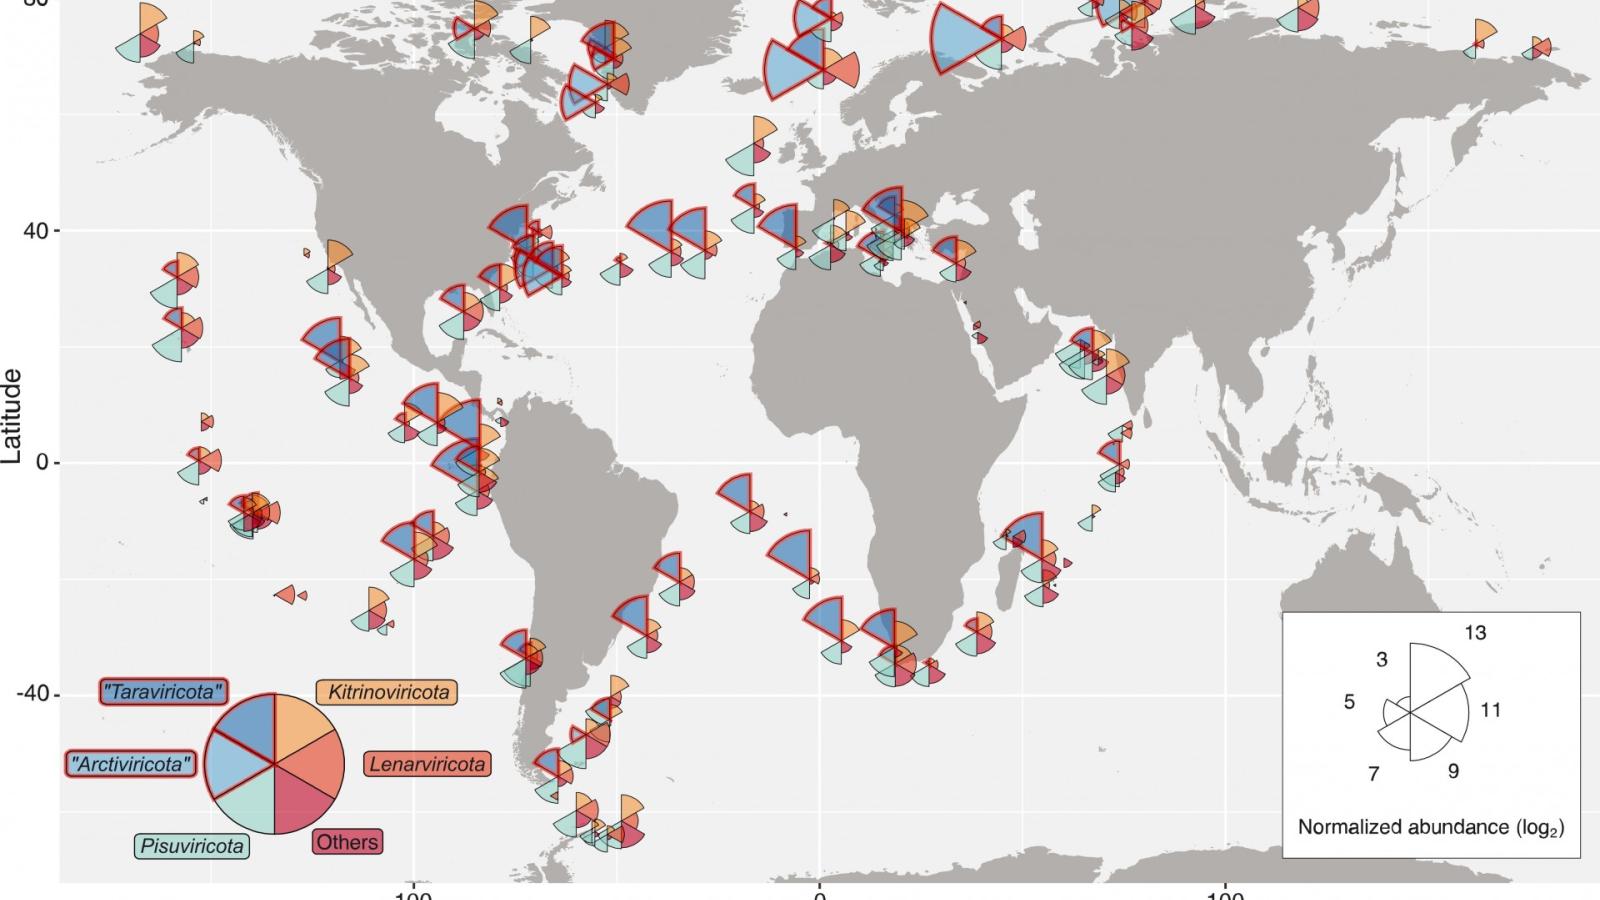 Map showing the distribution of RNA viruses across the ocean